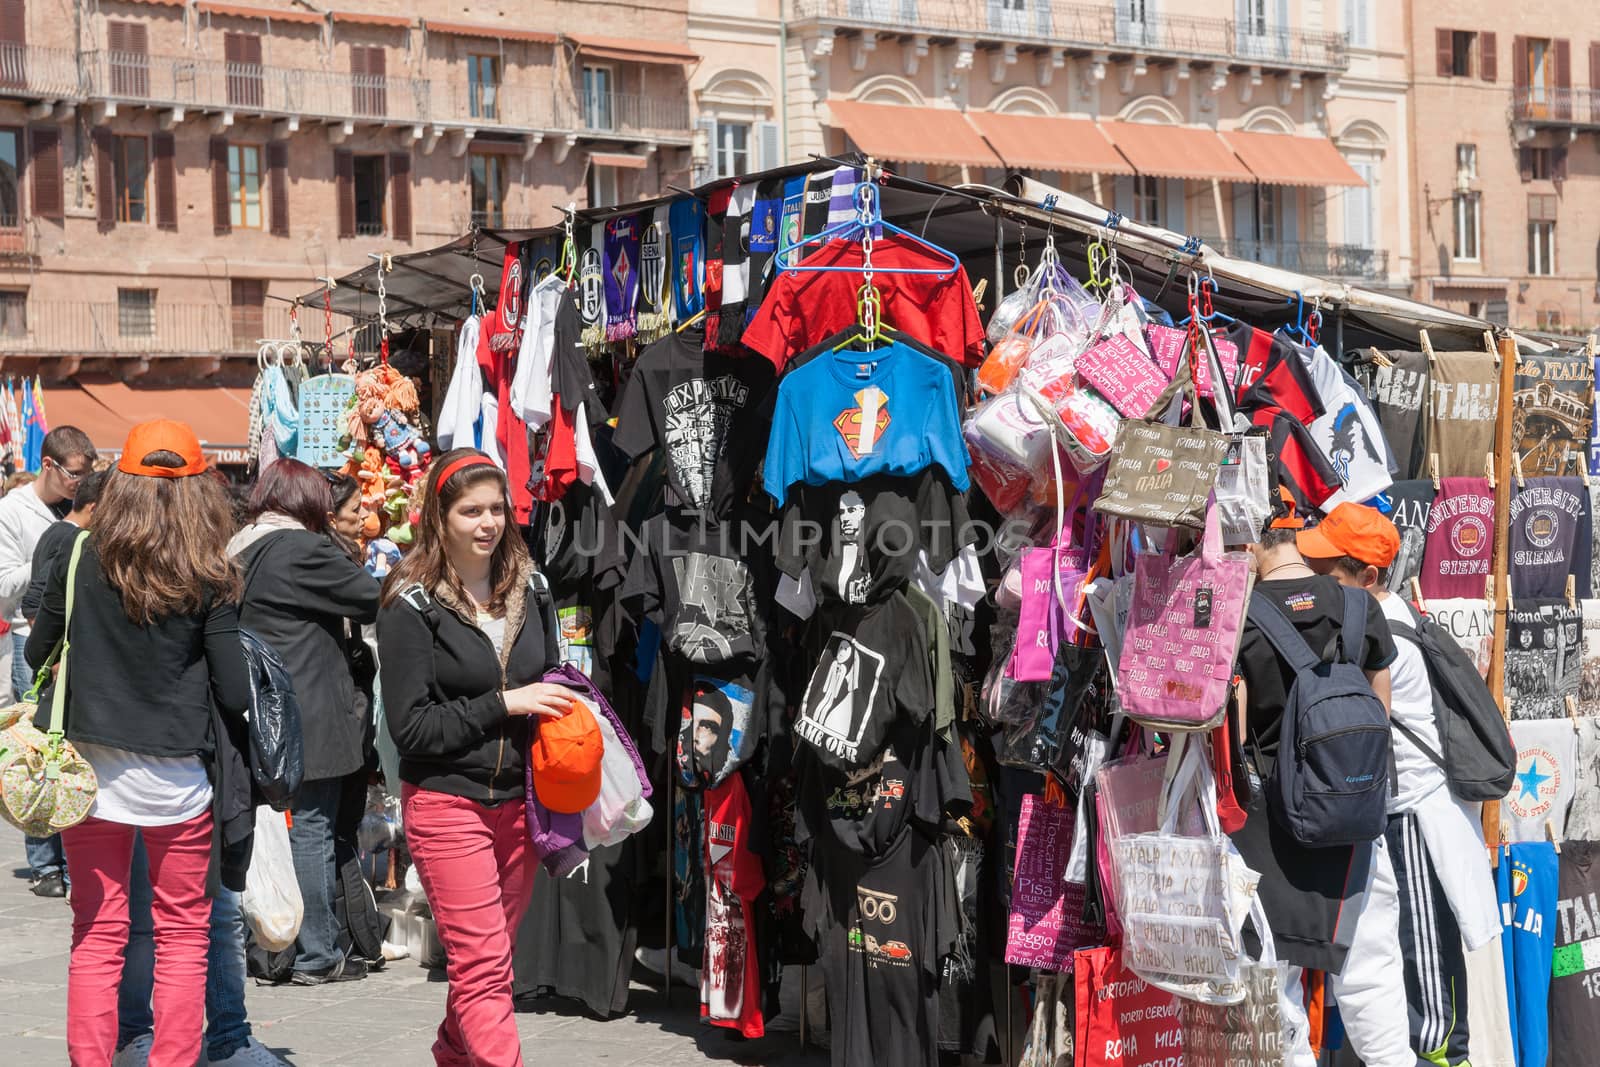 Siena, Italy - April 19, 2011: Tourists including two young woman both in pink trousers and black sweatshirts at market sales kiosk browsing and enjoying life in the Piazza Del Campo, Siena, Italy.